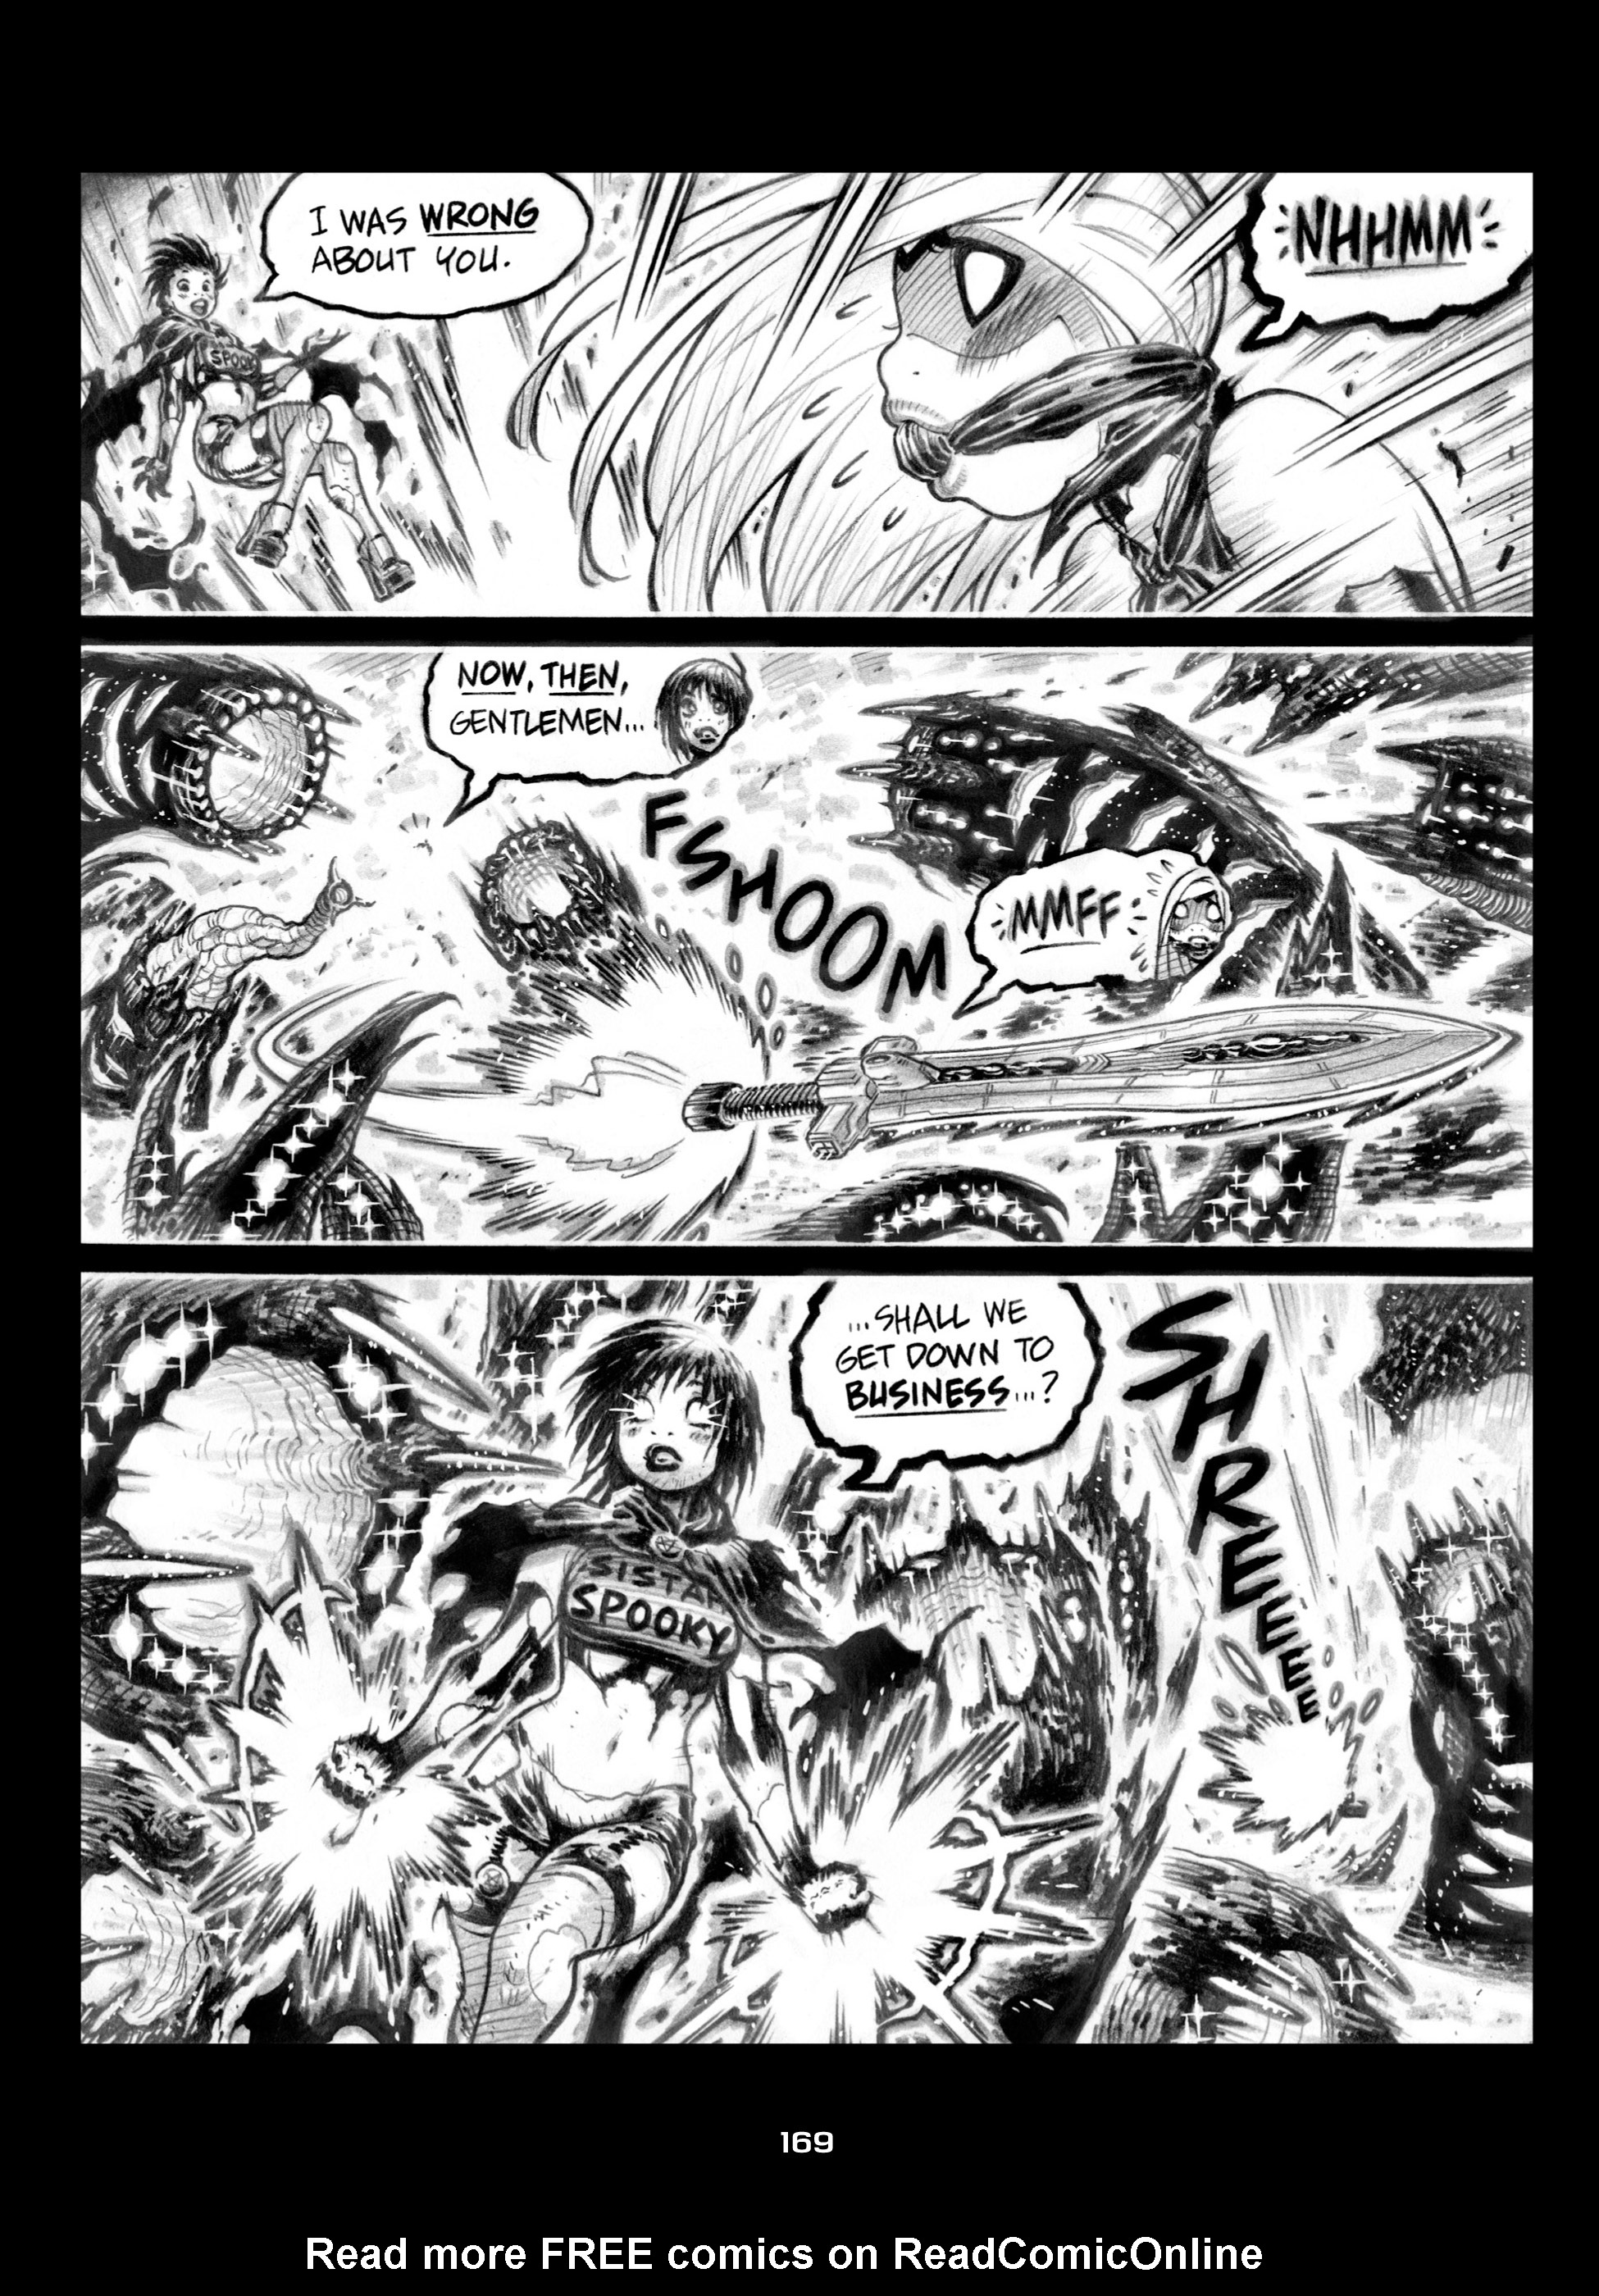 Read online Empowered comic -  Issue #8 - 169